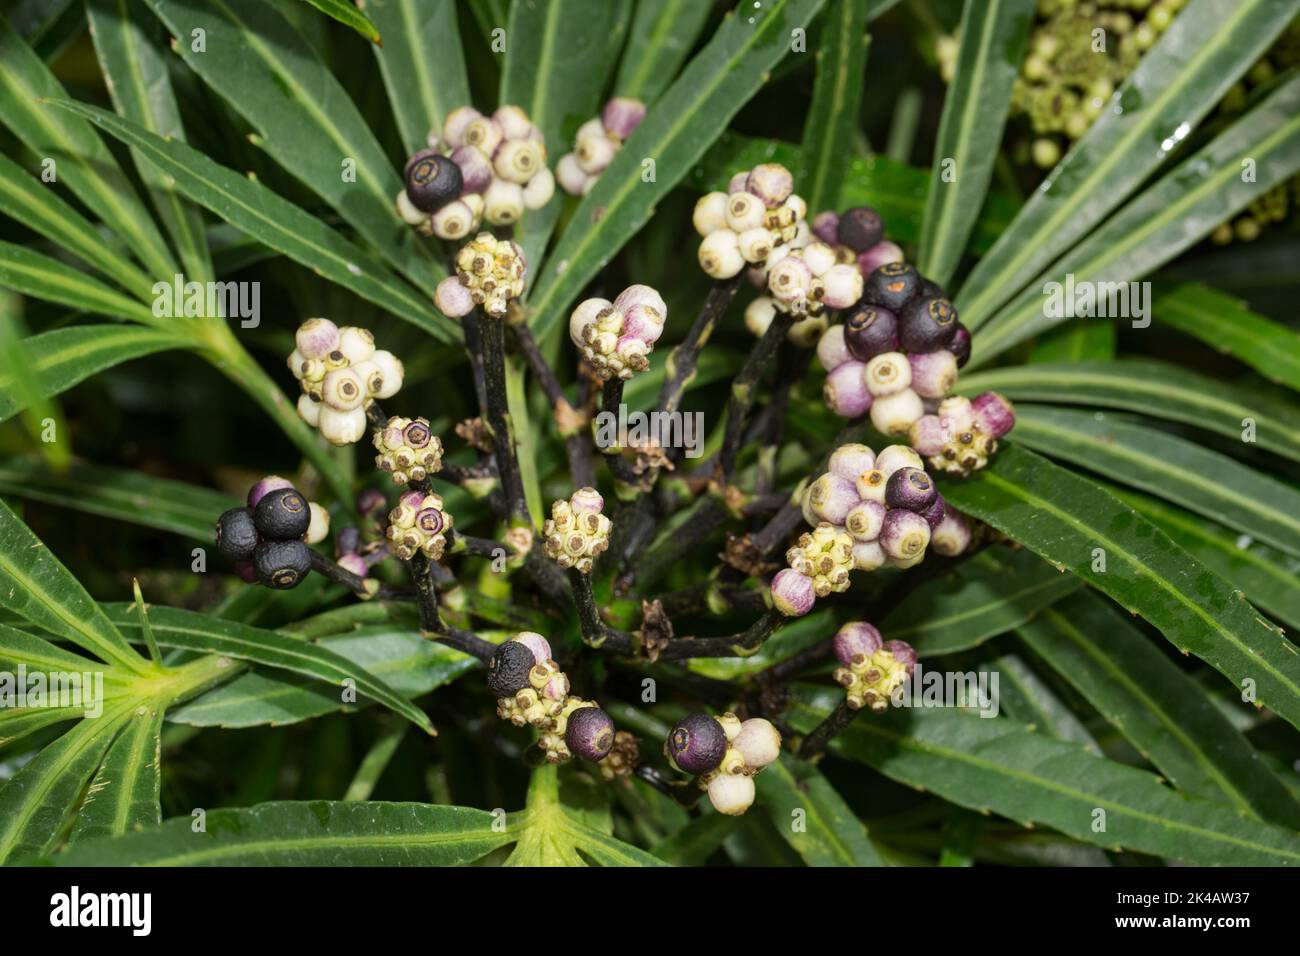 Aralia Osmoxylon lineare tropical ornamental miniature tree with green leaves and fruiting with many black berries Stock Photo